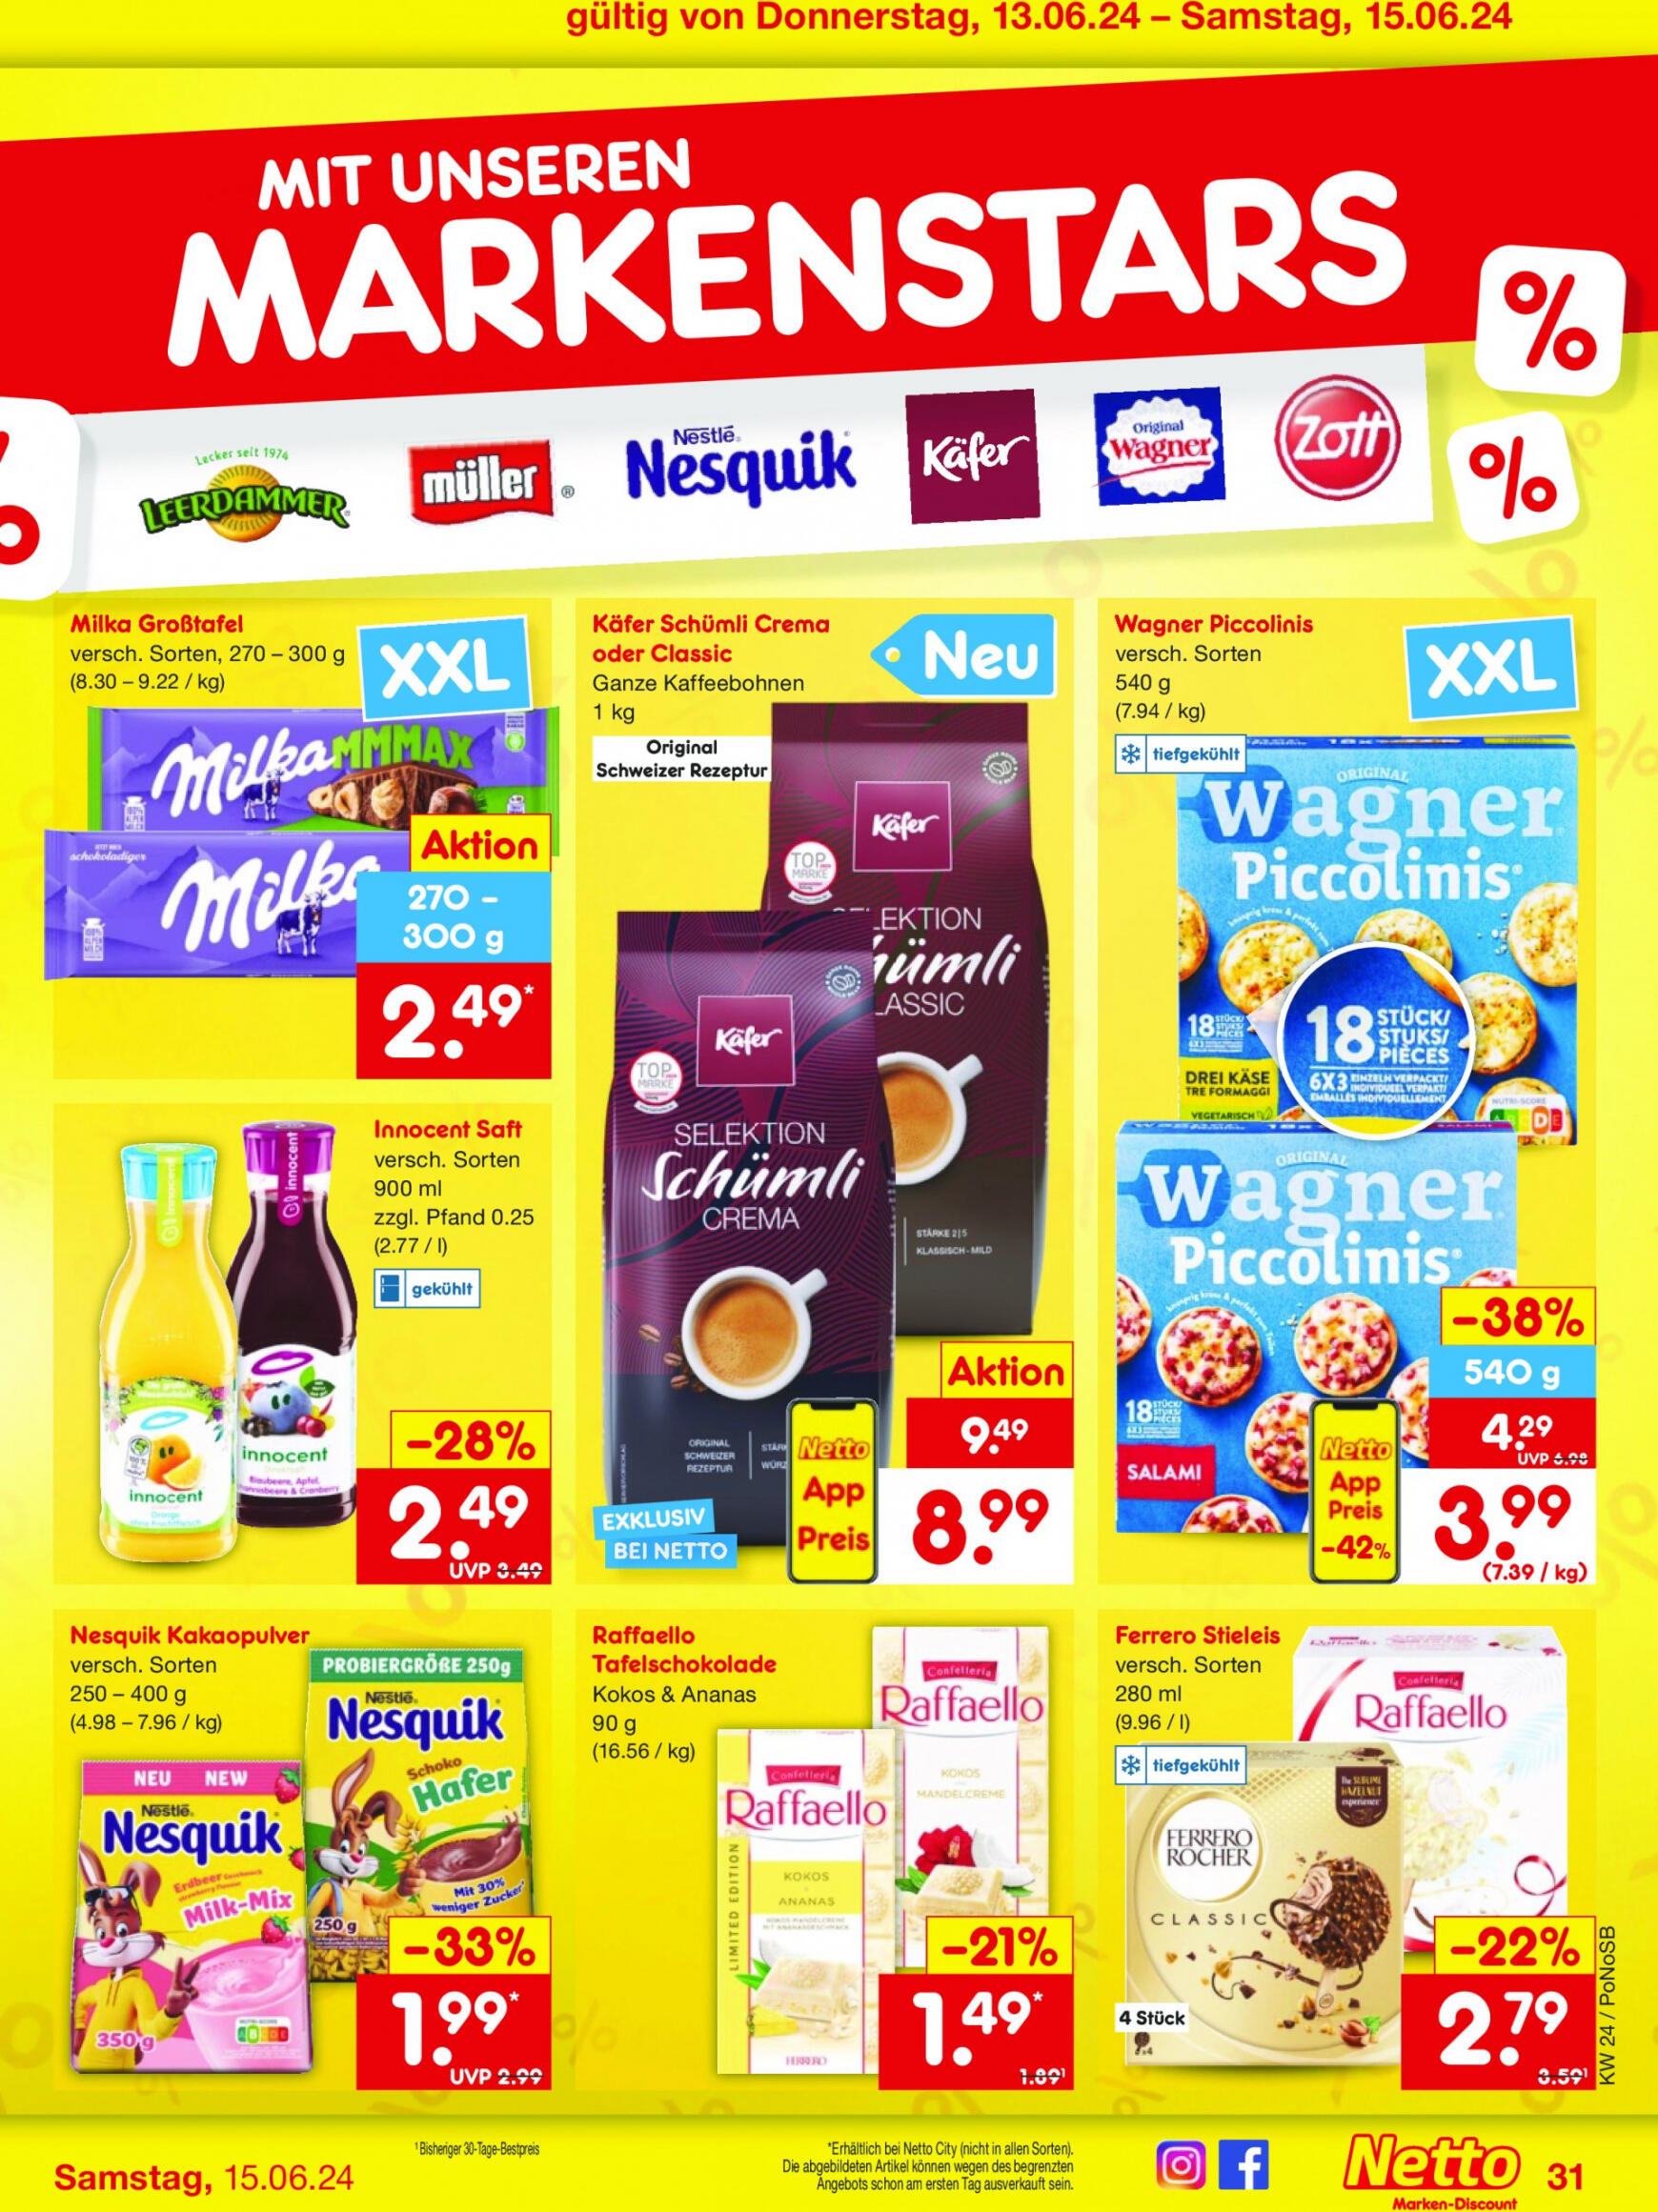 netto - Flyer Netto aktuell 10.06. - 15.06. - page: 47